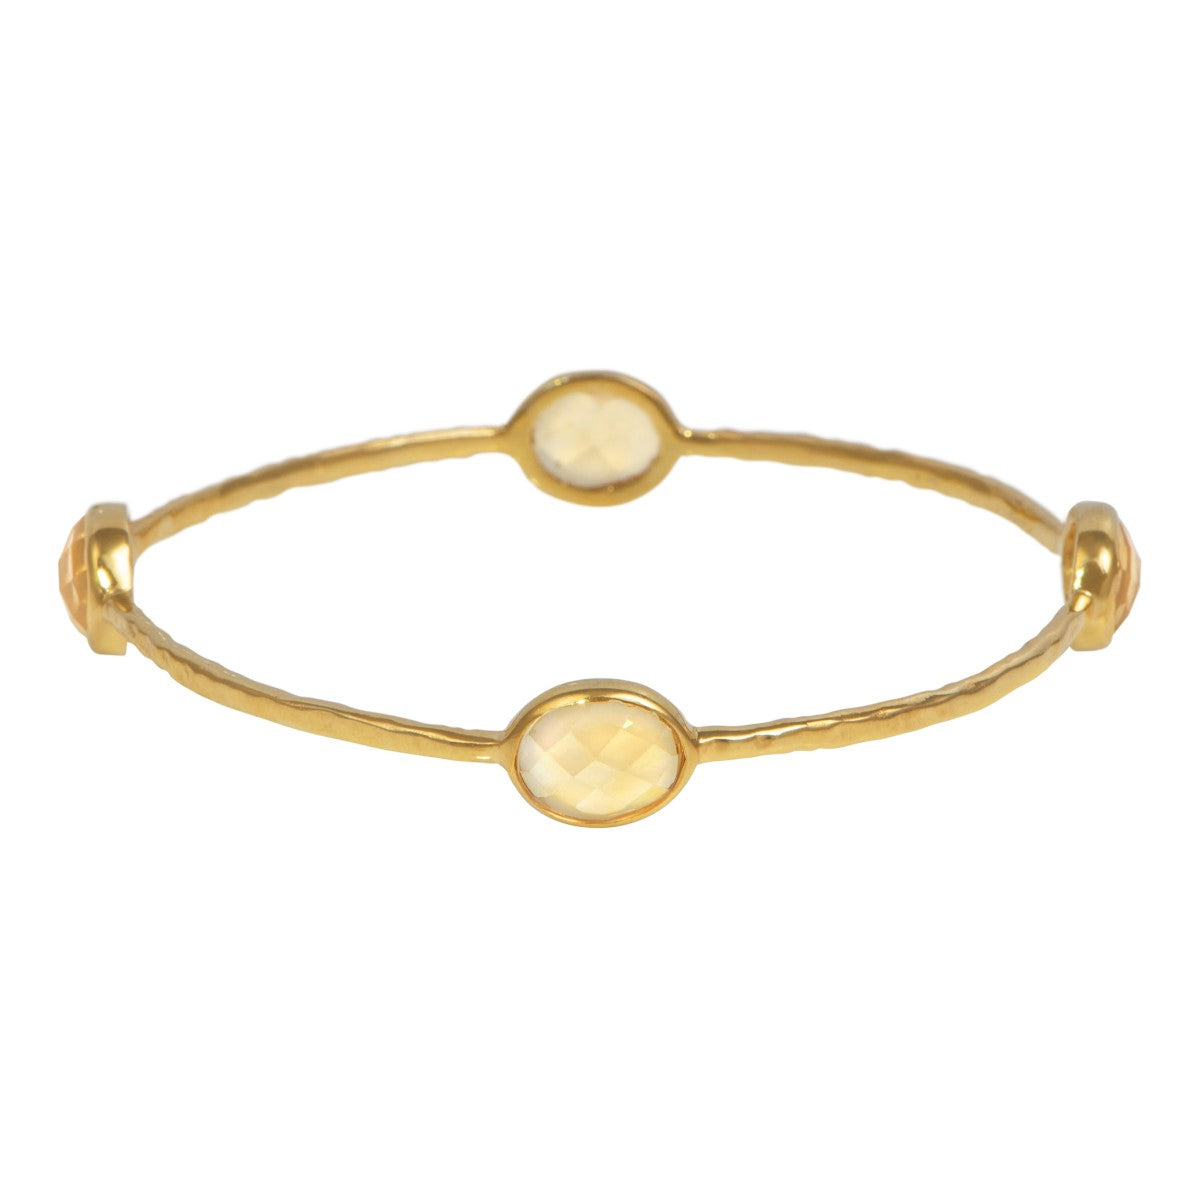 Citrine Gemstone Bangle in Gold Plated Sterling Silver